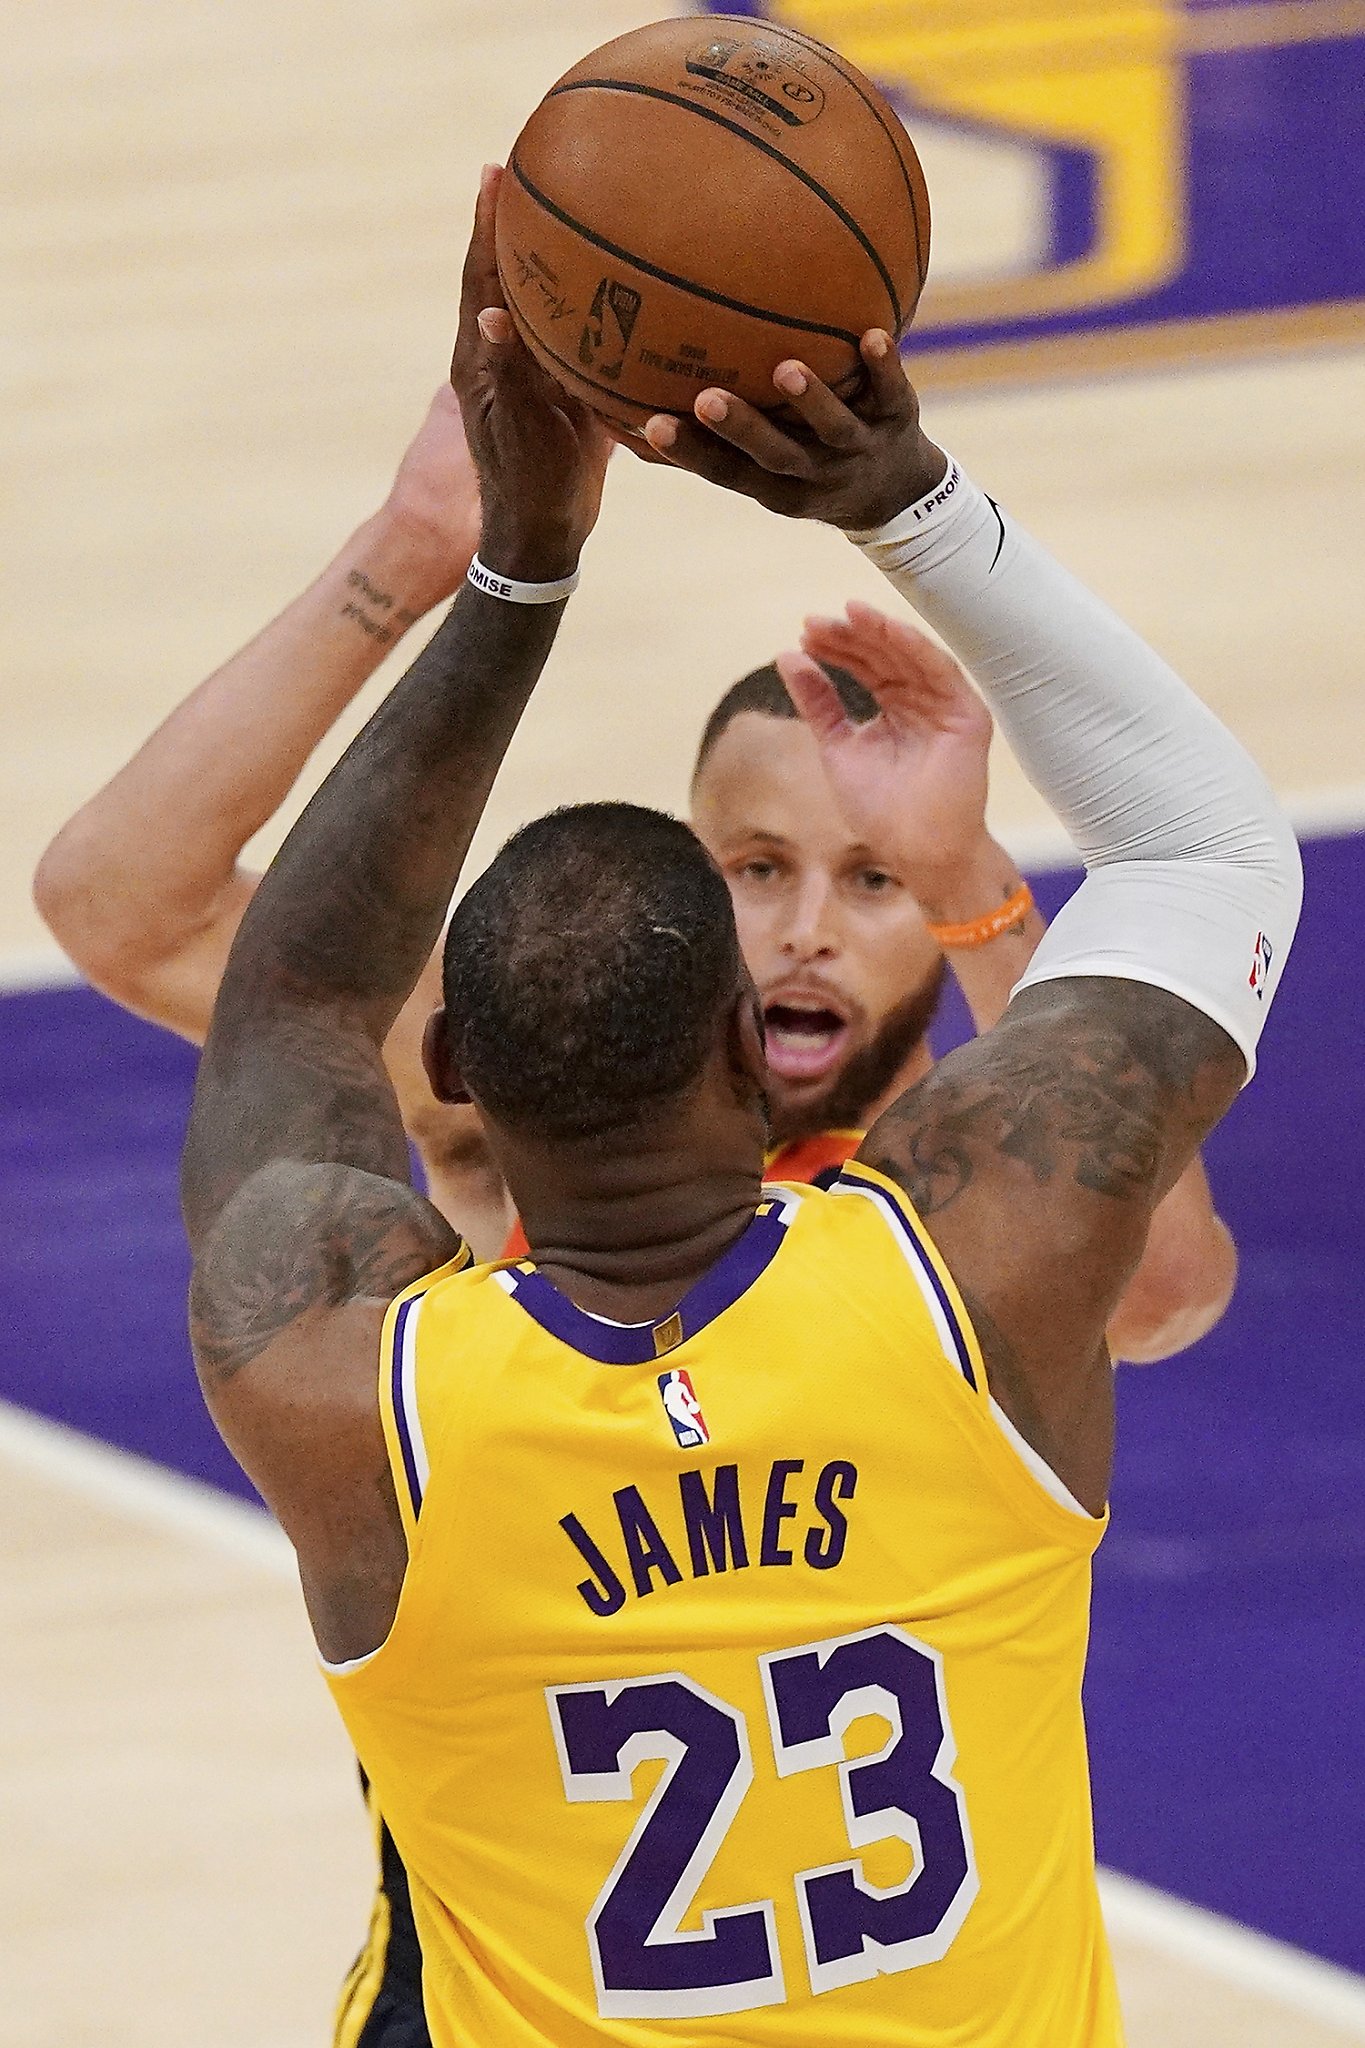 Curry, Lakers lead NBA Store best-sellers in Philippines